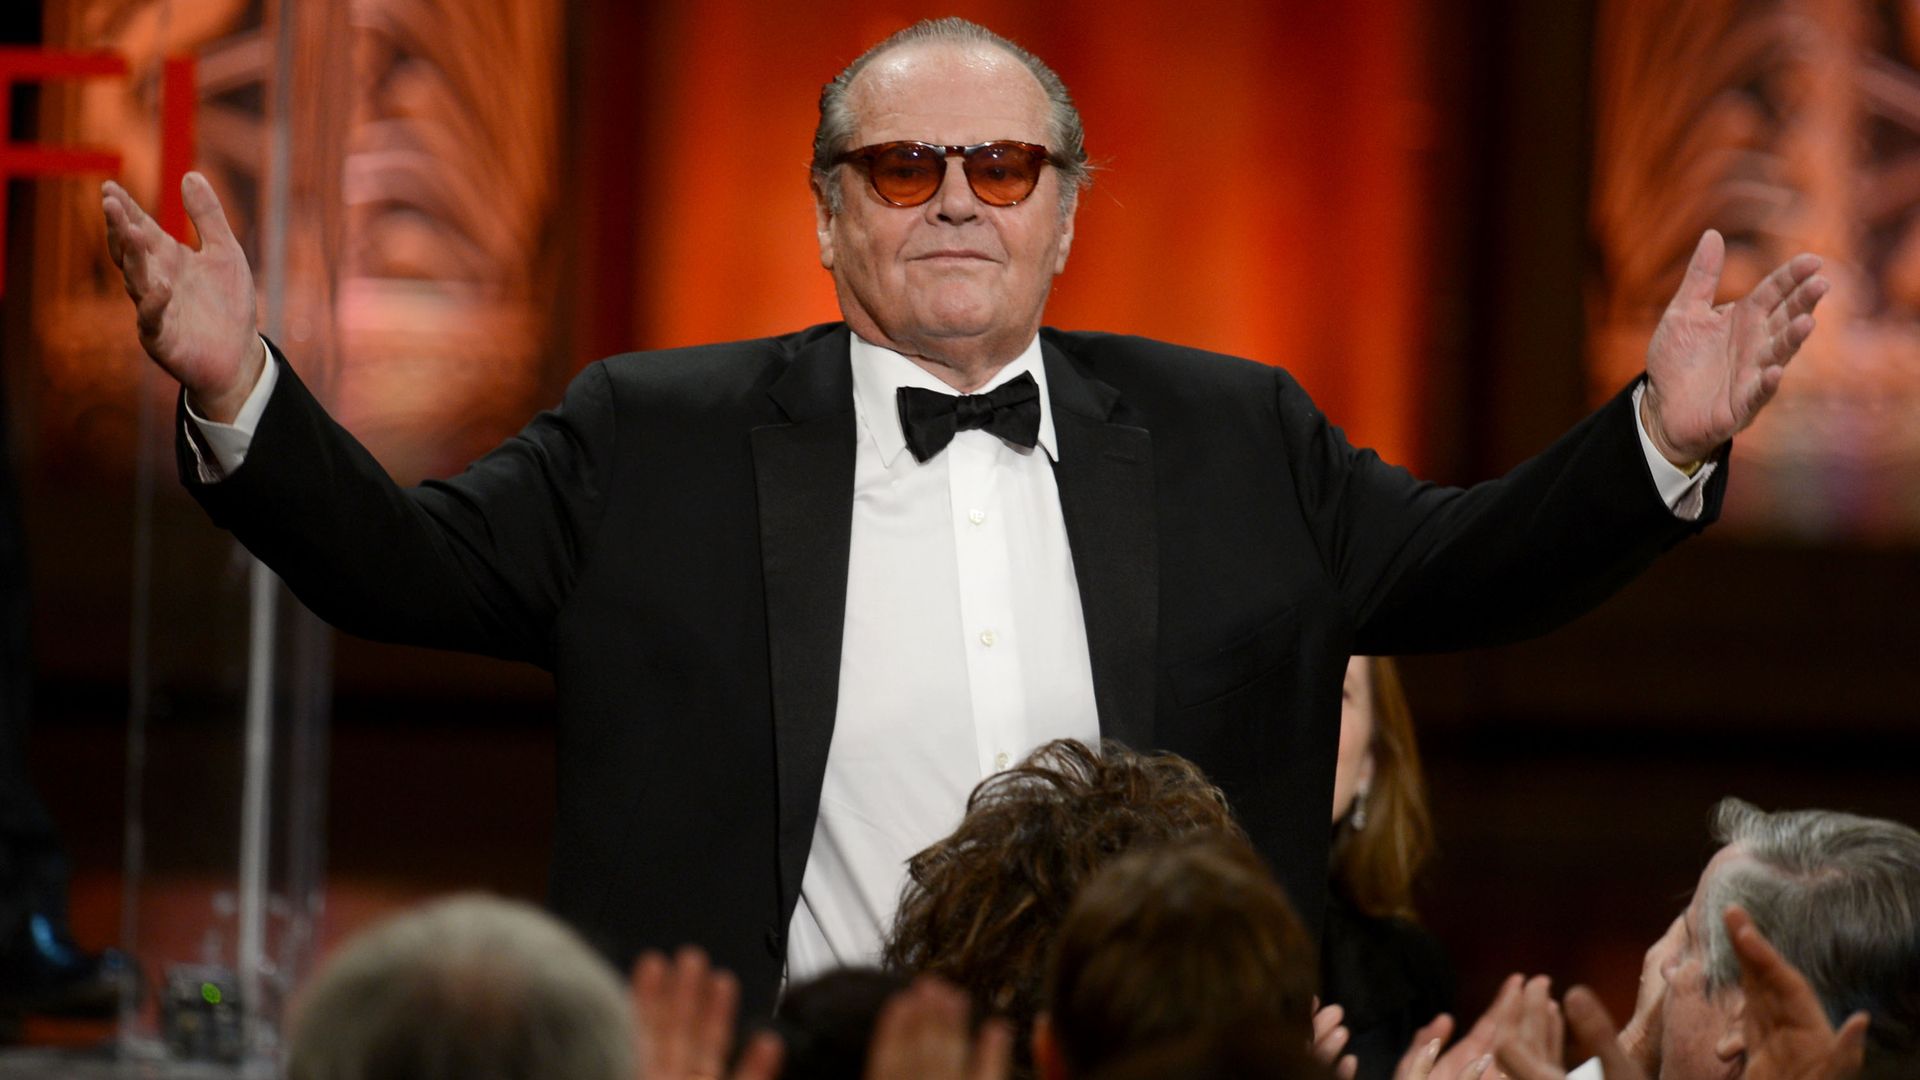 CULVER CITY, CA - JUNE 07:  Actor Jack Nicholson attends the 40th AFI Life Achievement Award honoring Shirley MacLaine held at Sony Pictures Studios on June 7, 2012 in Culver City, California. The AFI Life Achievement Award tribute to Shirley MacLaine will premiere on TV Land on Saturday, June 24 at 9PM ET/PST.  (Photo by Kevin Winter/Getty Images)